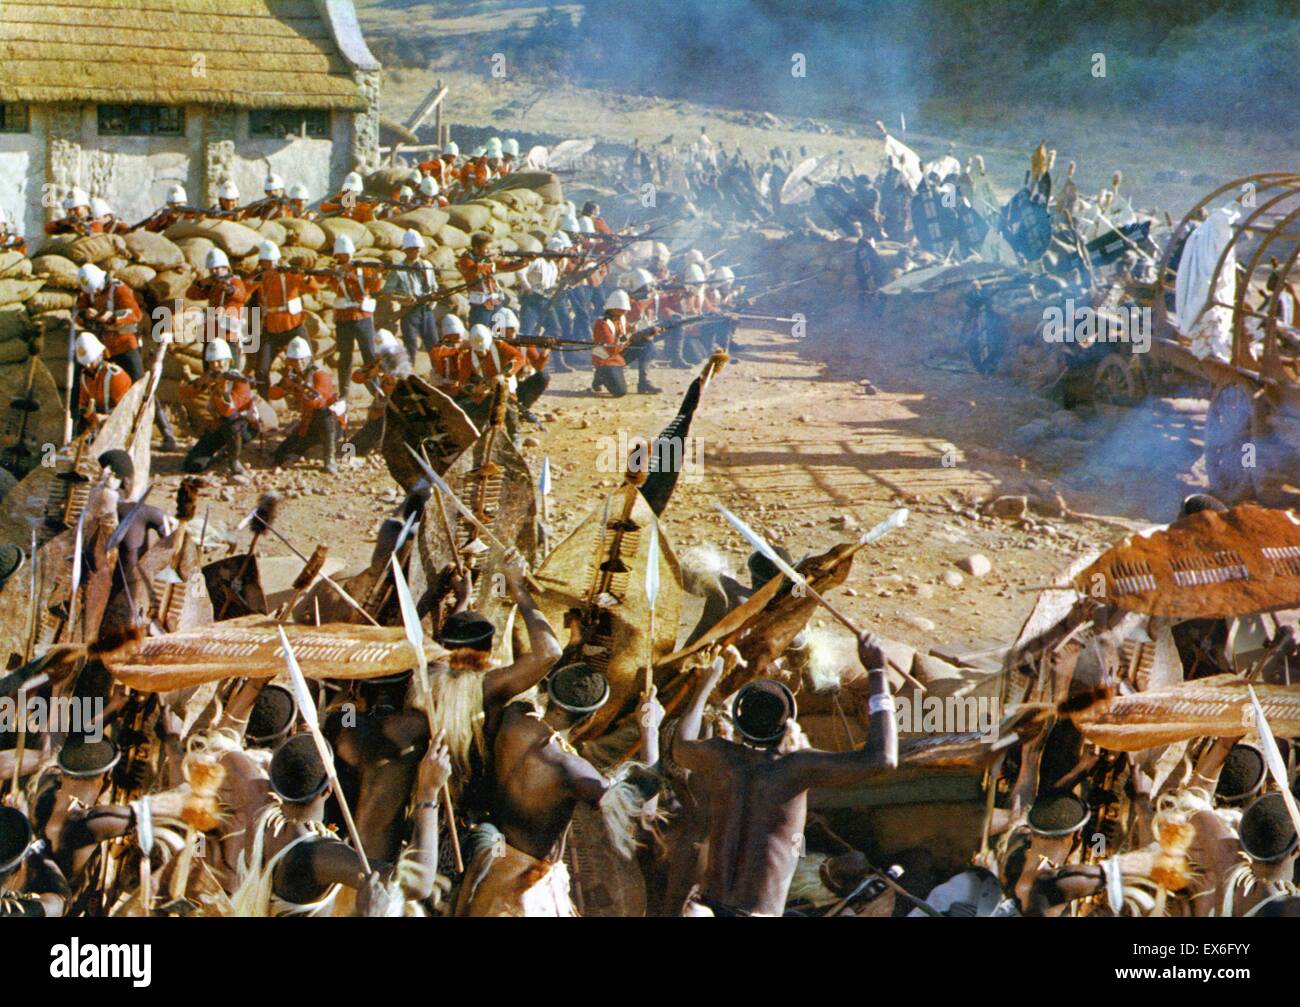 Zulu was a 1964 historical war film depicting the Battle of Rorke's Drift between the British Army and the Zulus in January 1879, during the Anglo-Zulu War where 150 British soldiers, many of whom were sick and wounded as patients in a field hospital, suc Stock Photo